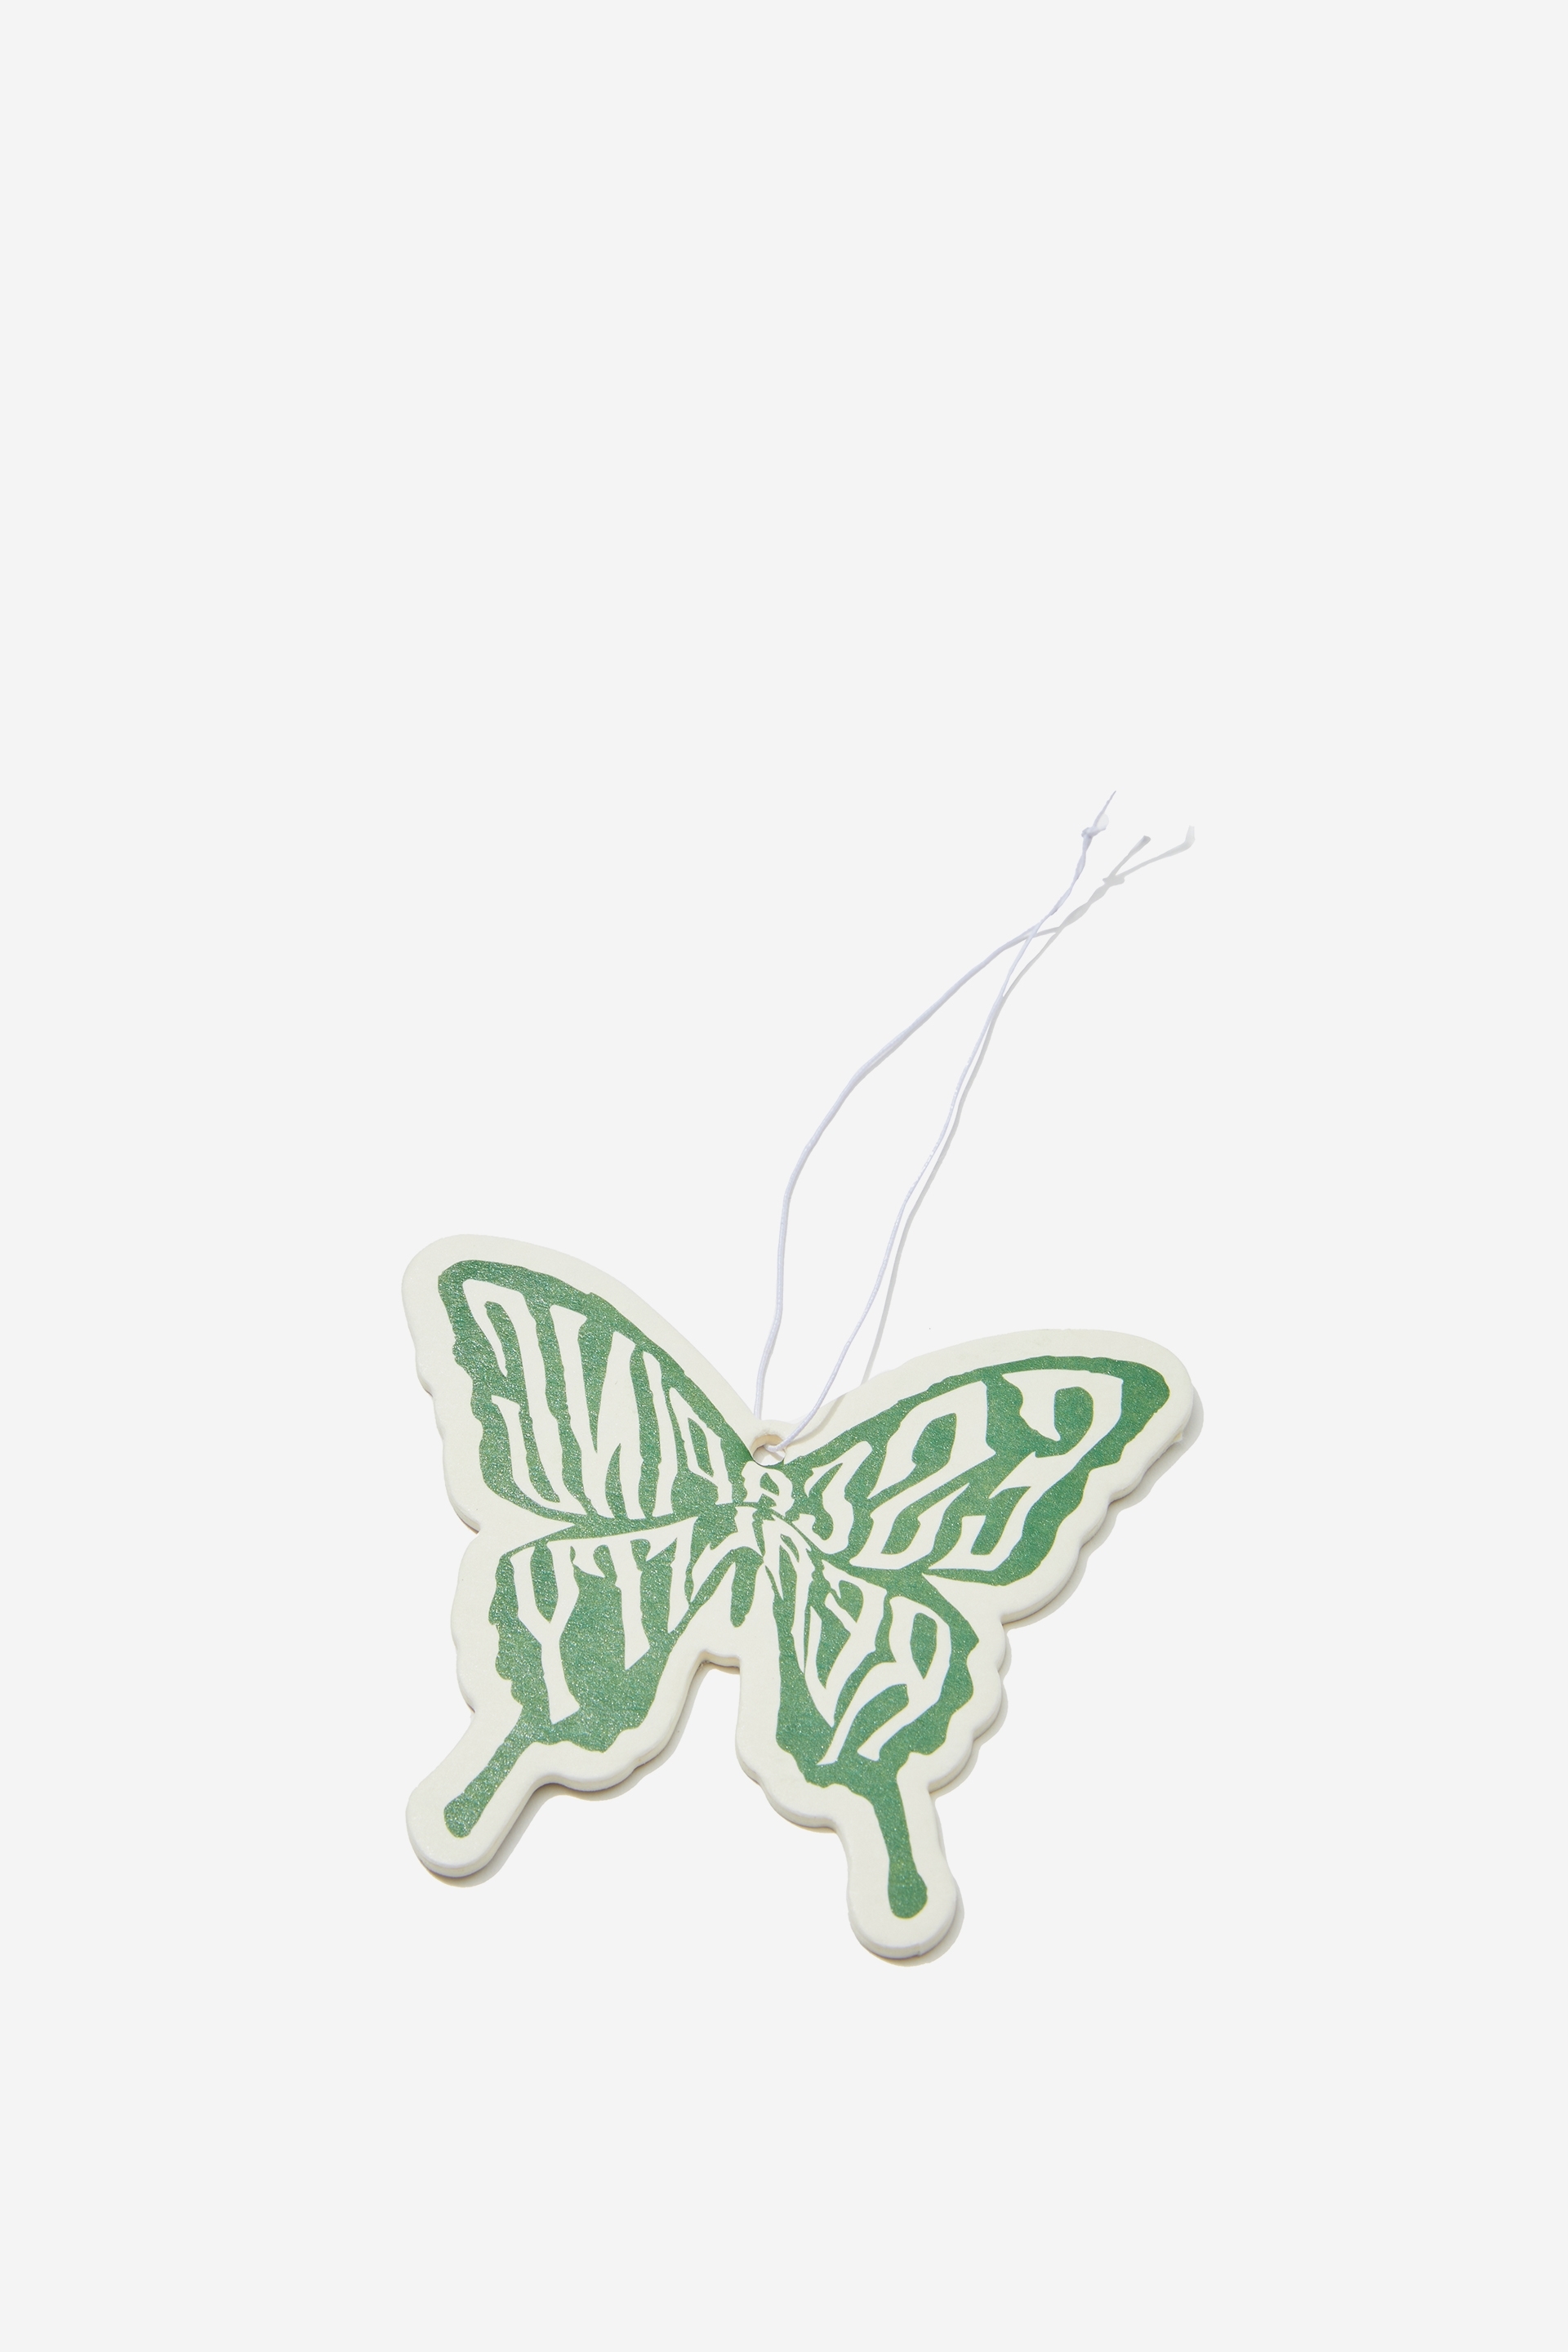 Typo - Keep It Fresh Air Freshener - Green and white escaping reality butterfly